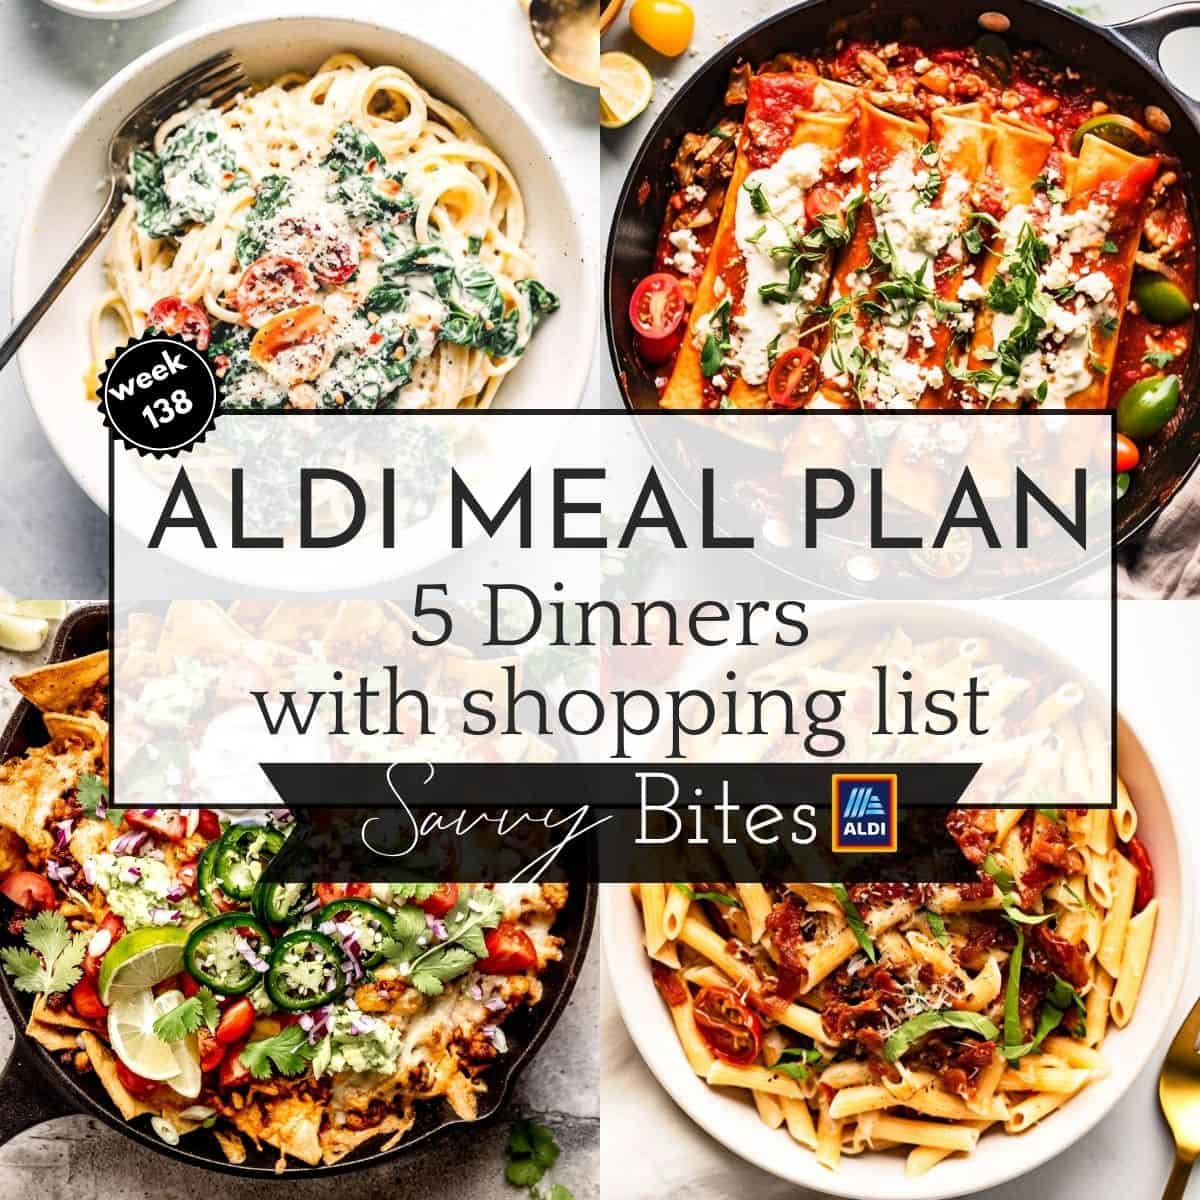 Aldi budget meal plan recipes in a photo collage.